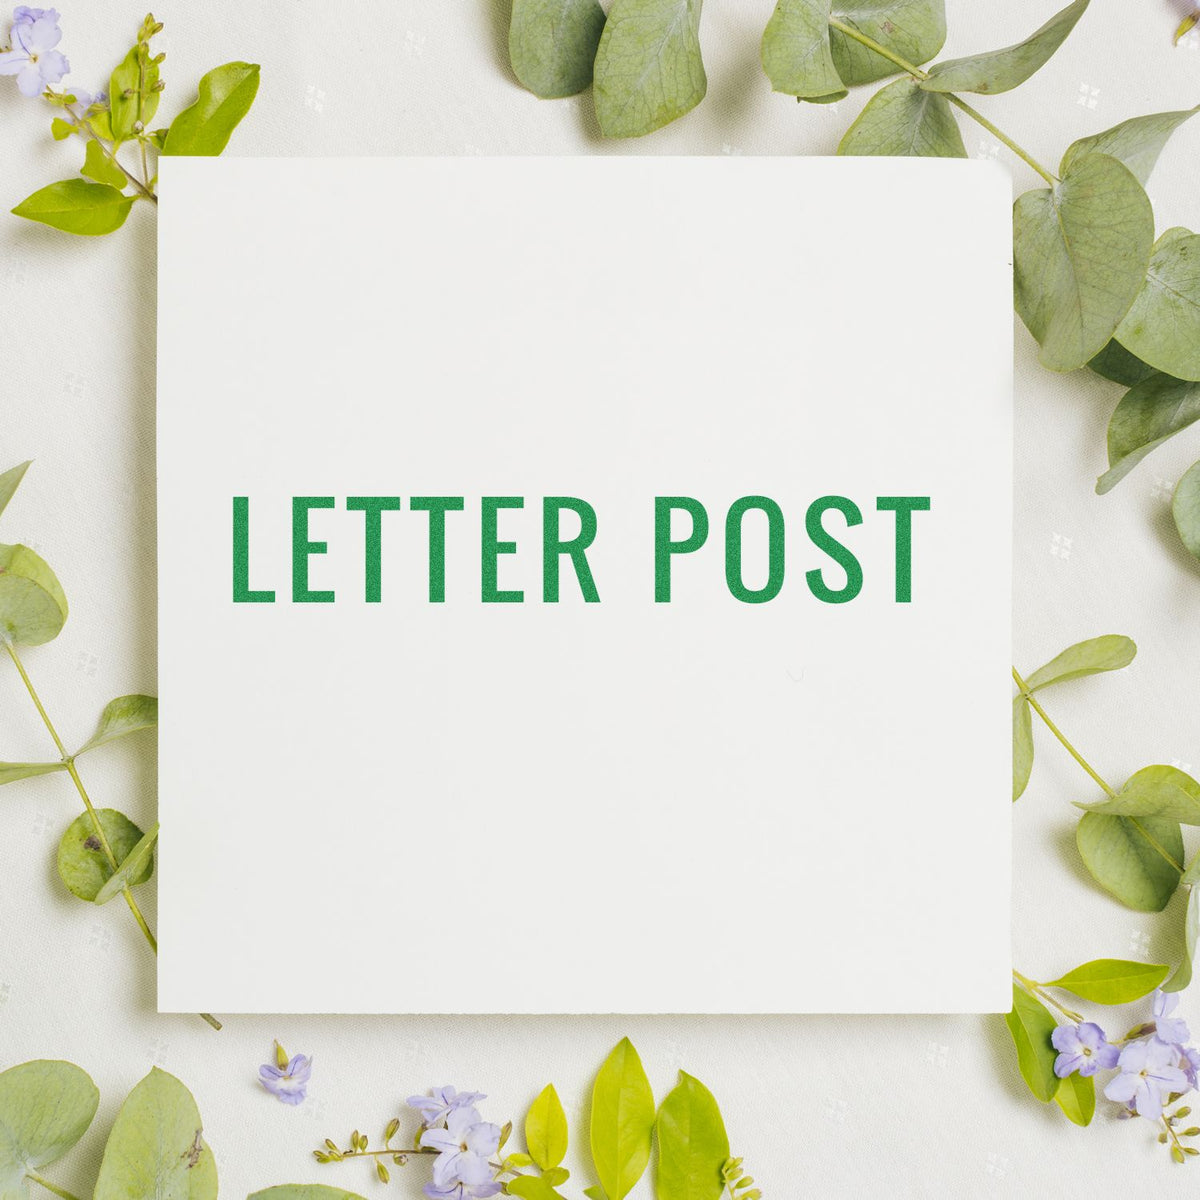 Large Letter Post Rubber Stamp In Use